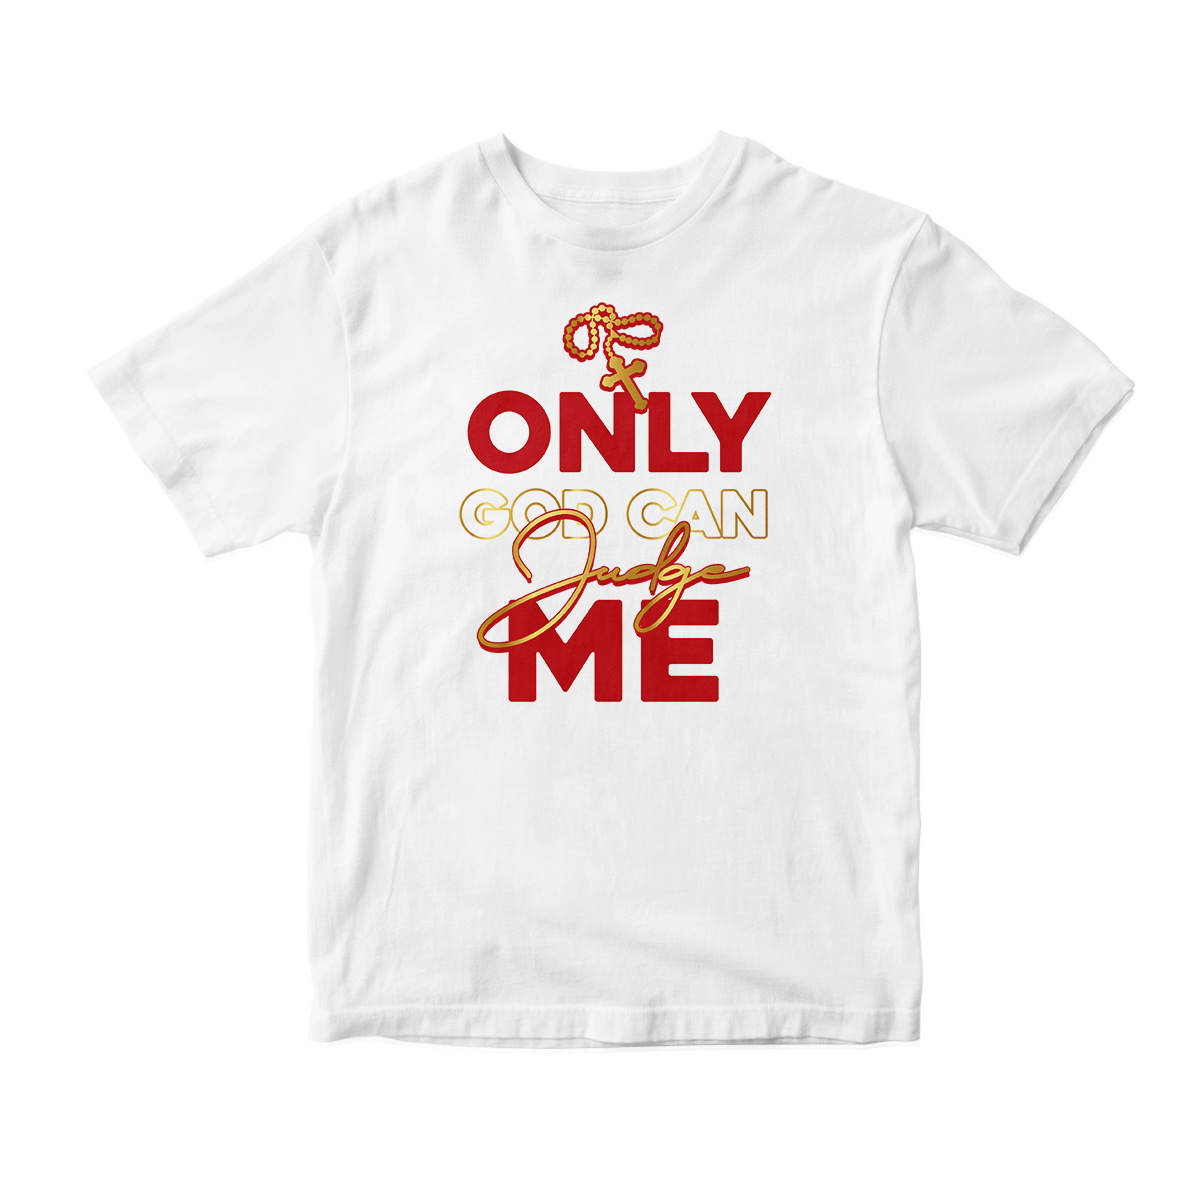 'Only God Can Judge Me' in FIBA CW Short Sleeve Tee